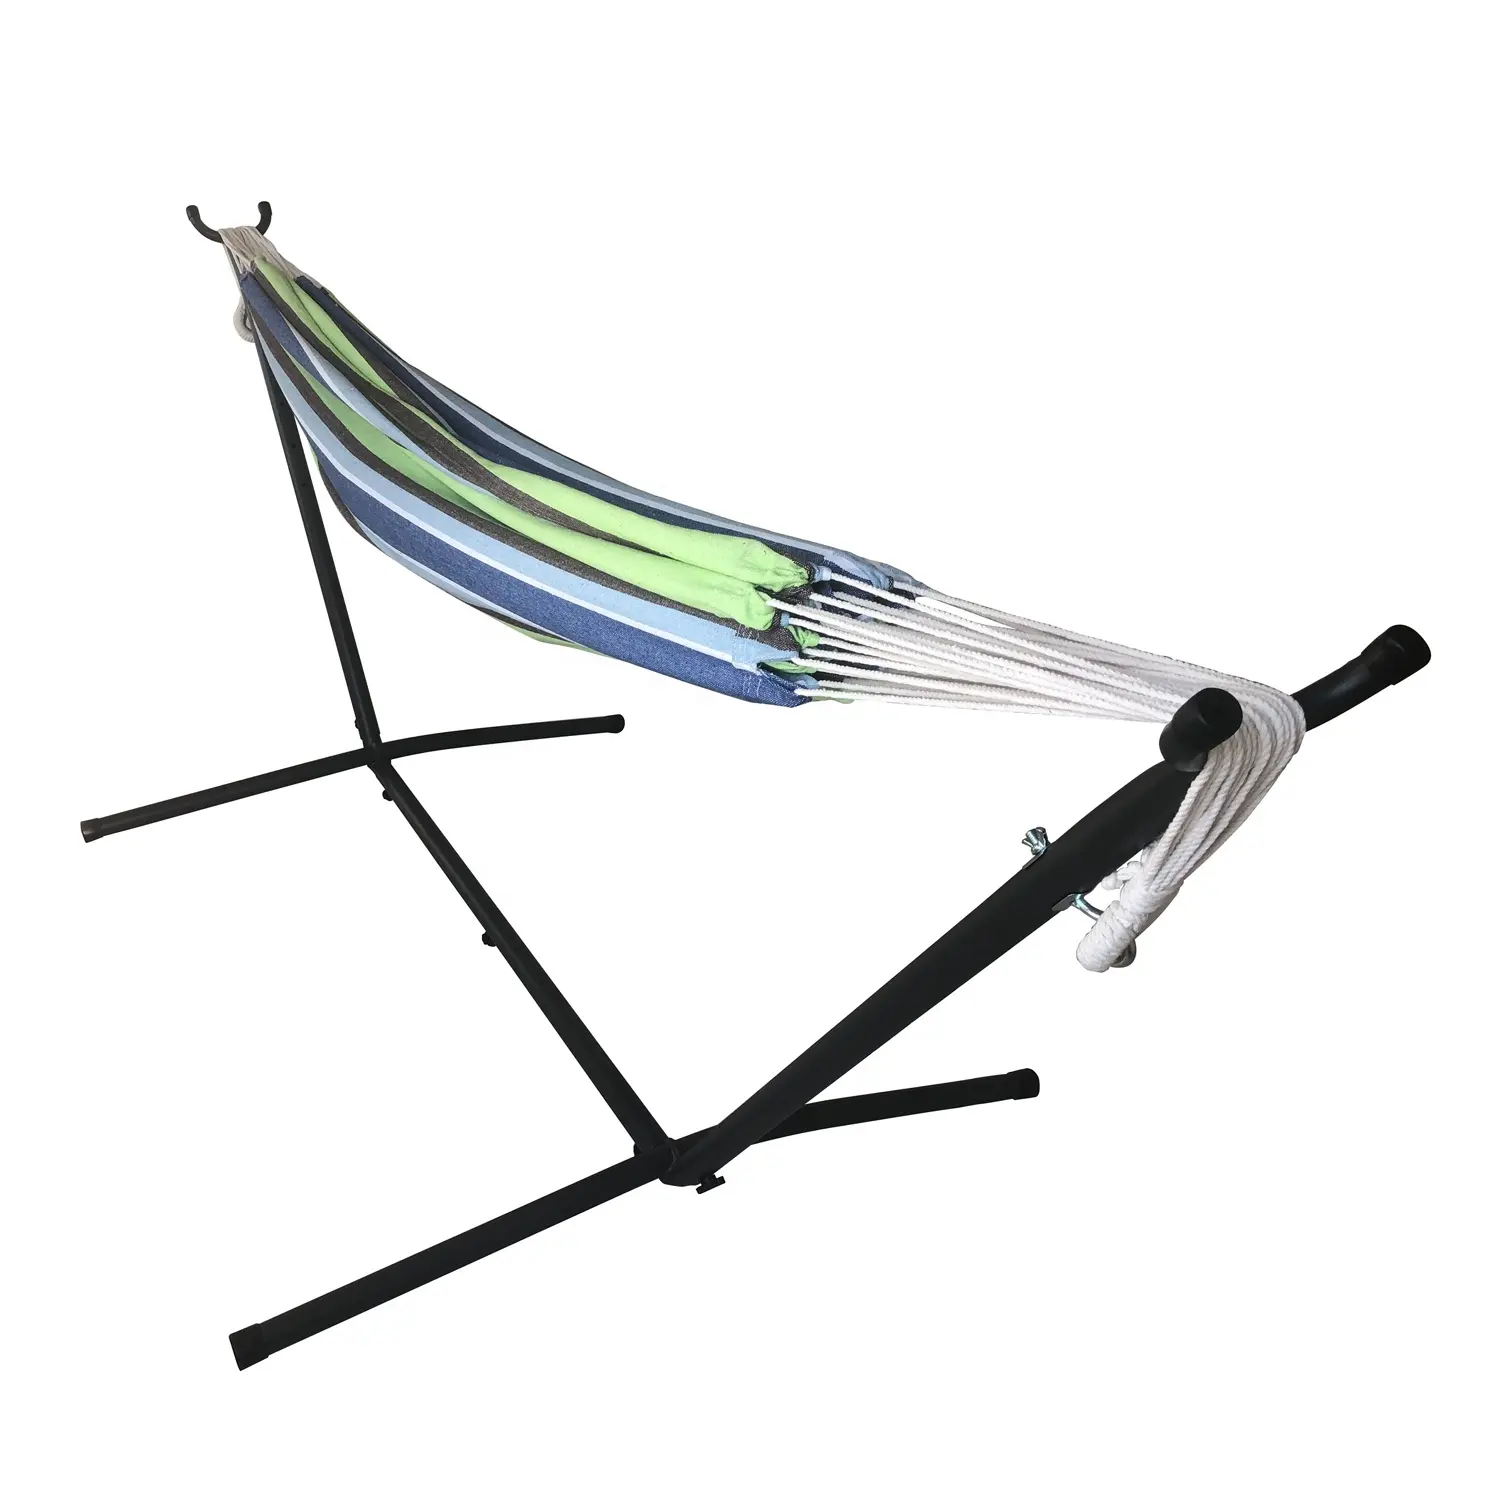 Striped Hammock with stand Deluxe Set Includes Portable Carrying Case muliti blue hammock with stand